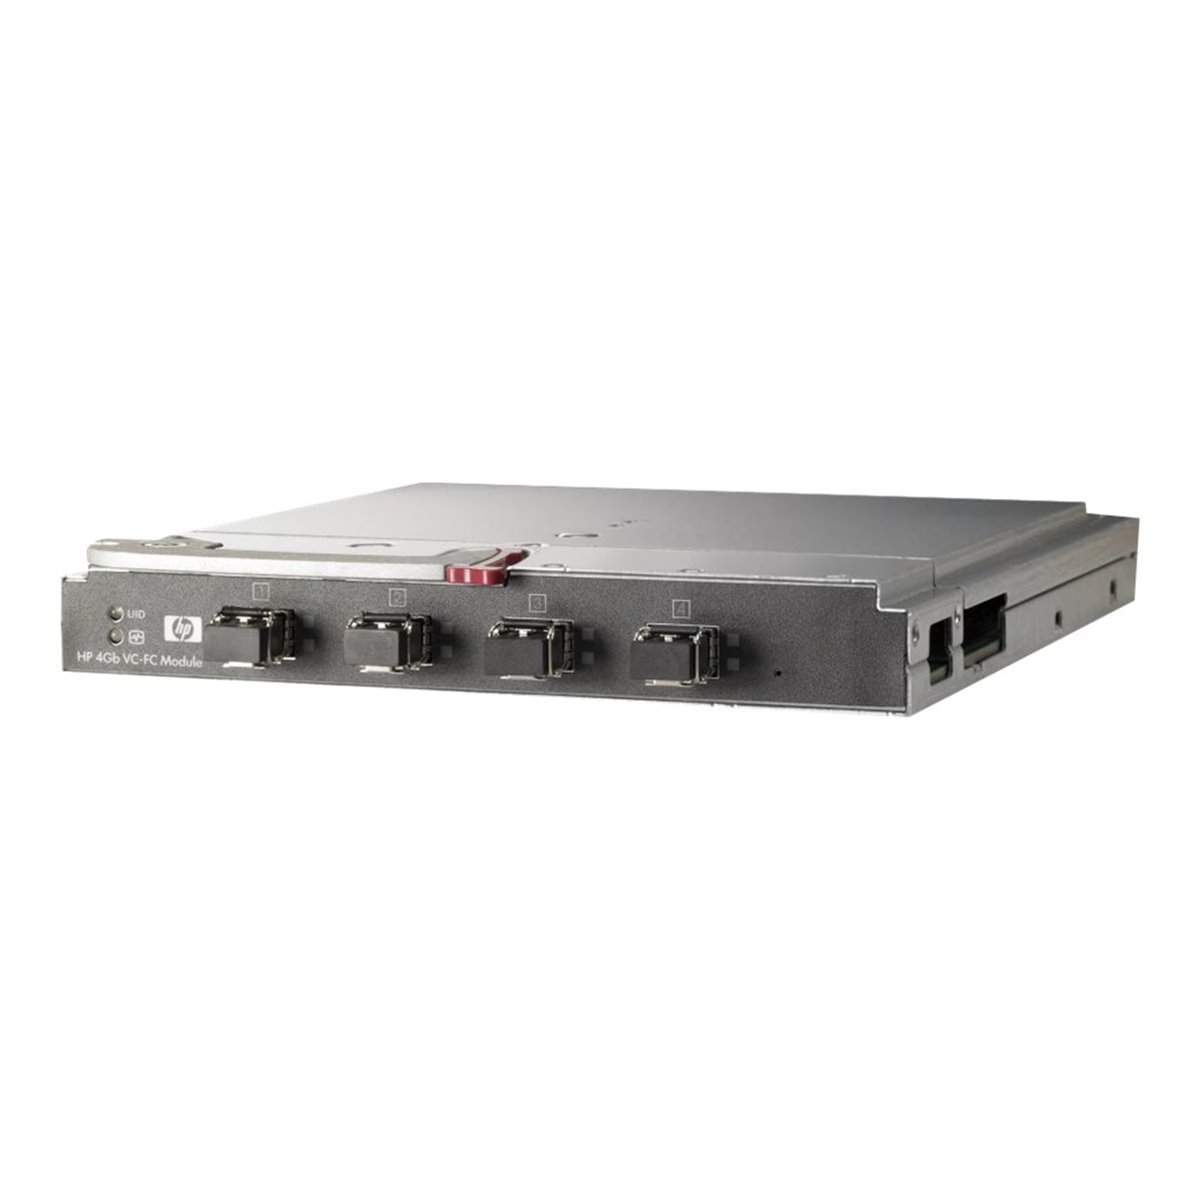 HPE 4Gb Virtual Connect FIBRE CHANNEL Module FOR c - Interface Card